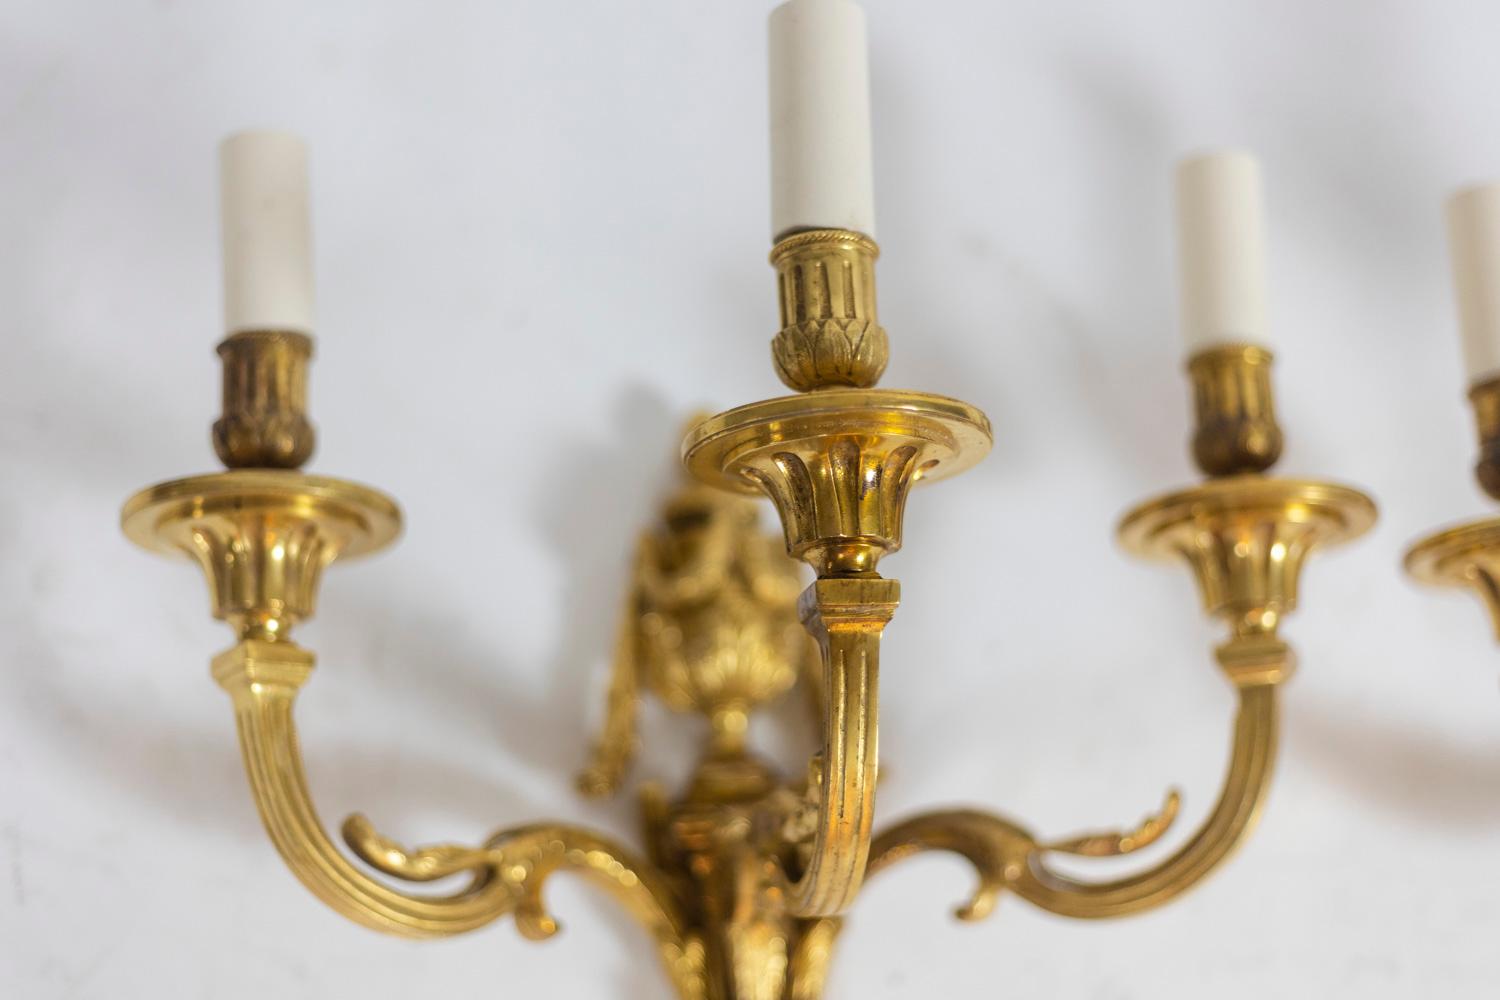 Pair of Louis XVI style sconces, with three gilt bronze lights, decorated with leaves, a fire pot, a garland and sconces.

French work realized circa 1880.